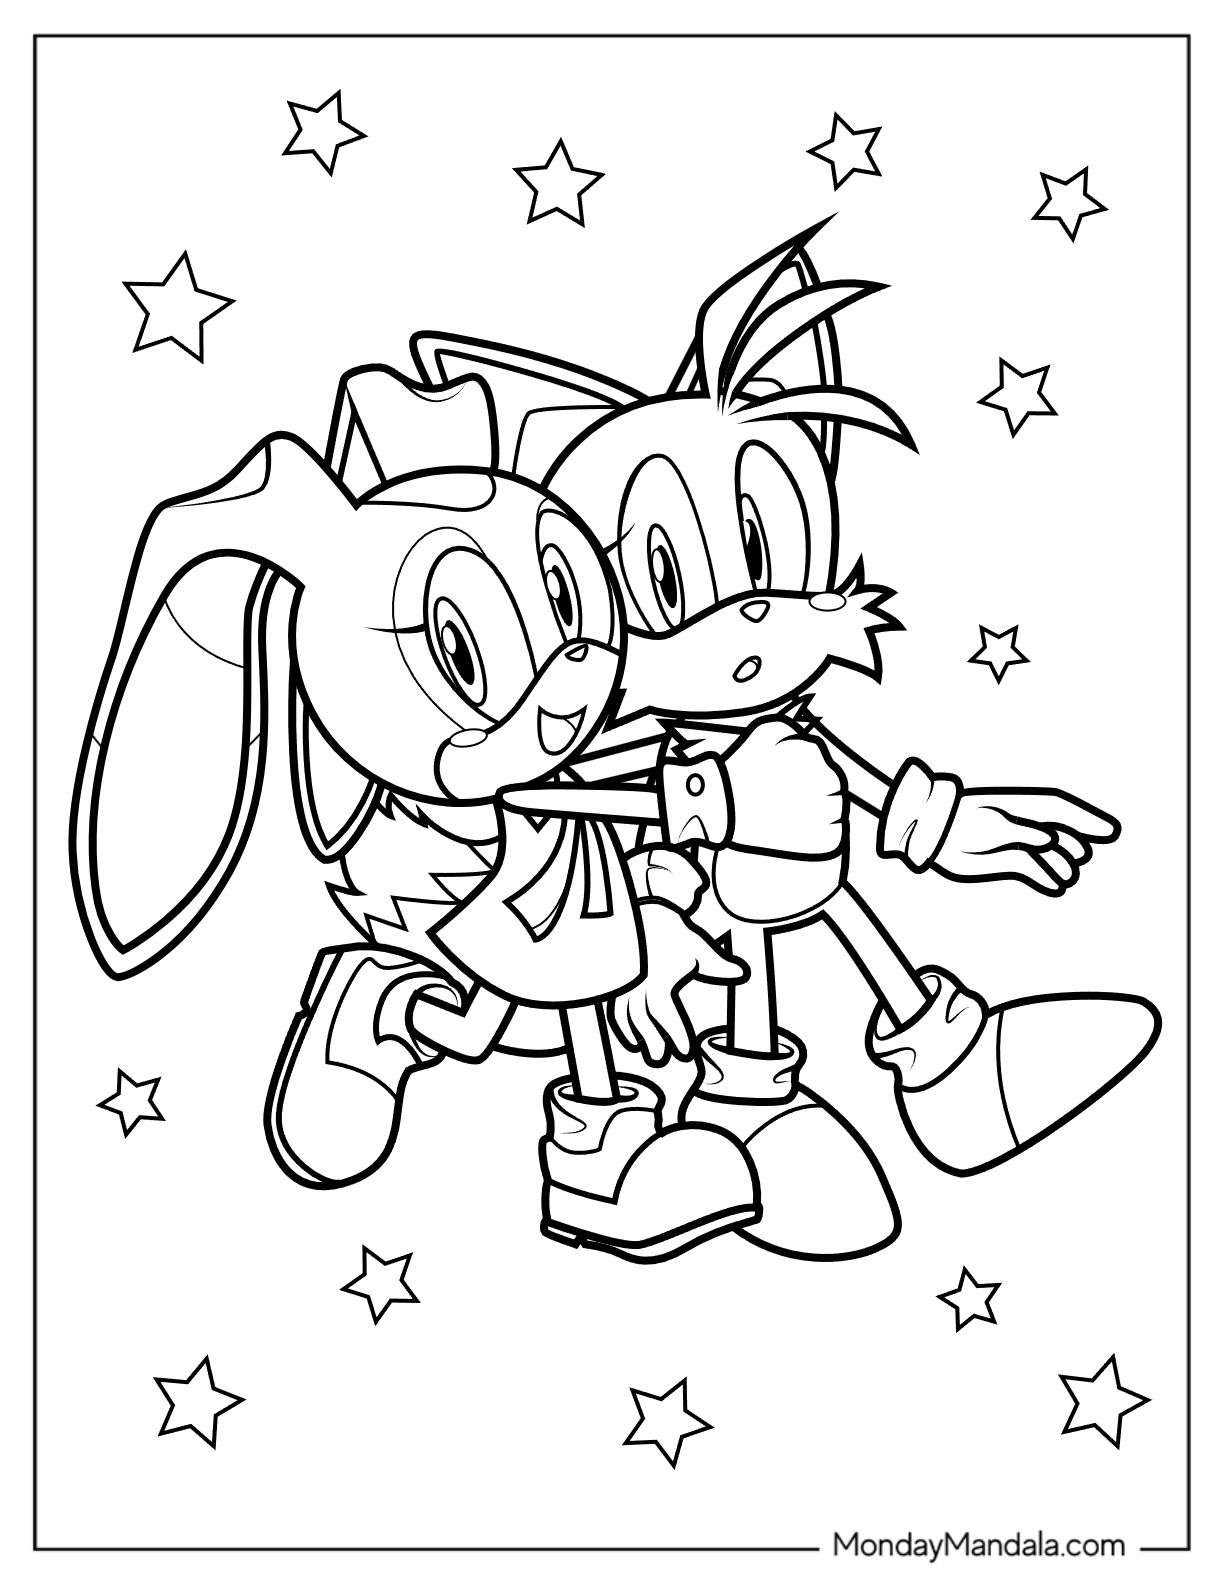 Tails coloring pages free pdf printables coloring pages color tailed